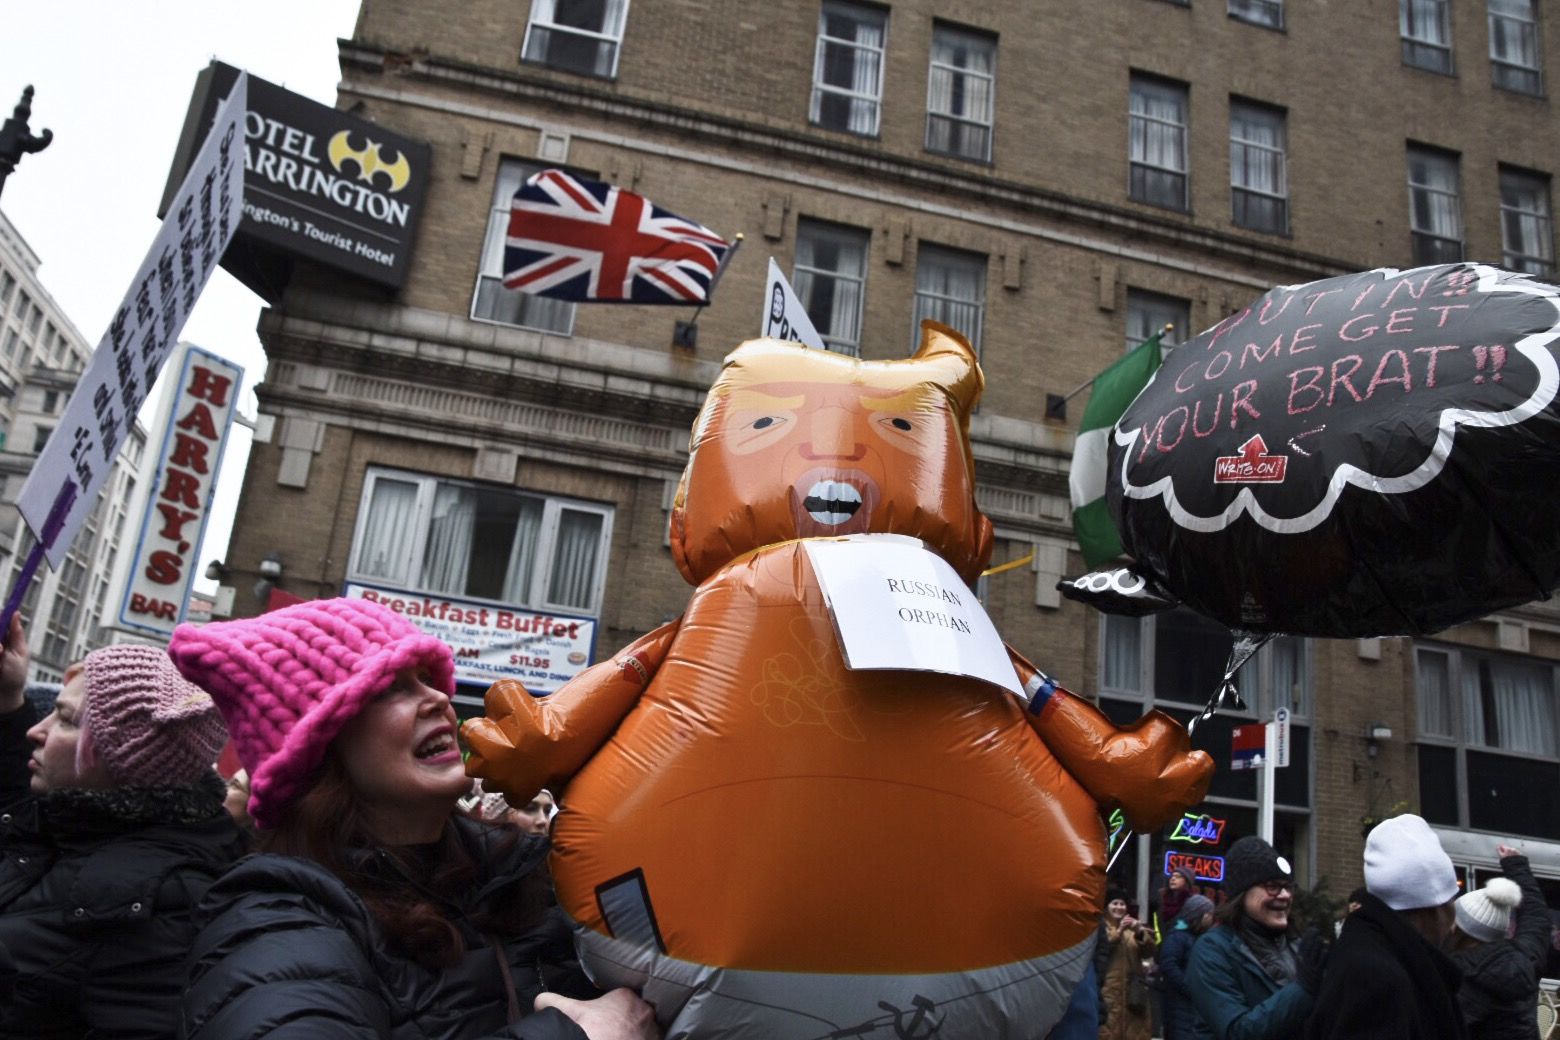 A protester holds a balloon featuring an orange baby with the likeness of Trump. The so-called “Trump baby blimp” was quickly embraced by left-wing American activists after a giant blimp took flight over London during Trump’s visit there last summer. (WTOP/Alejandro Alvarez)